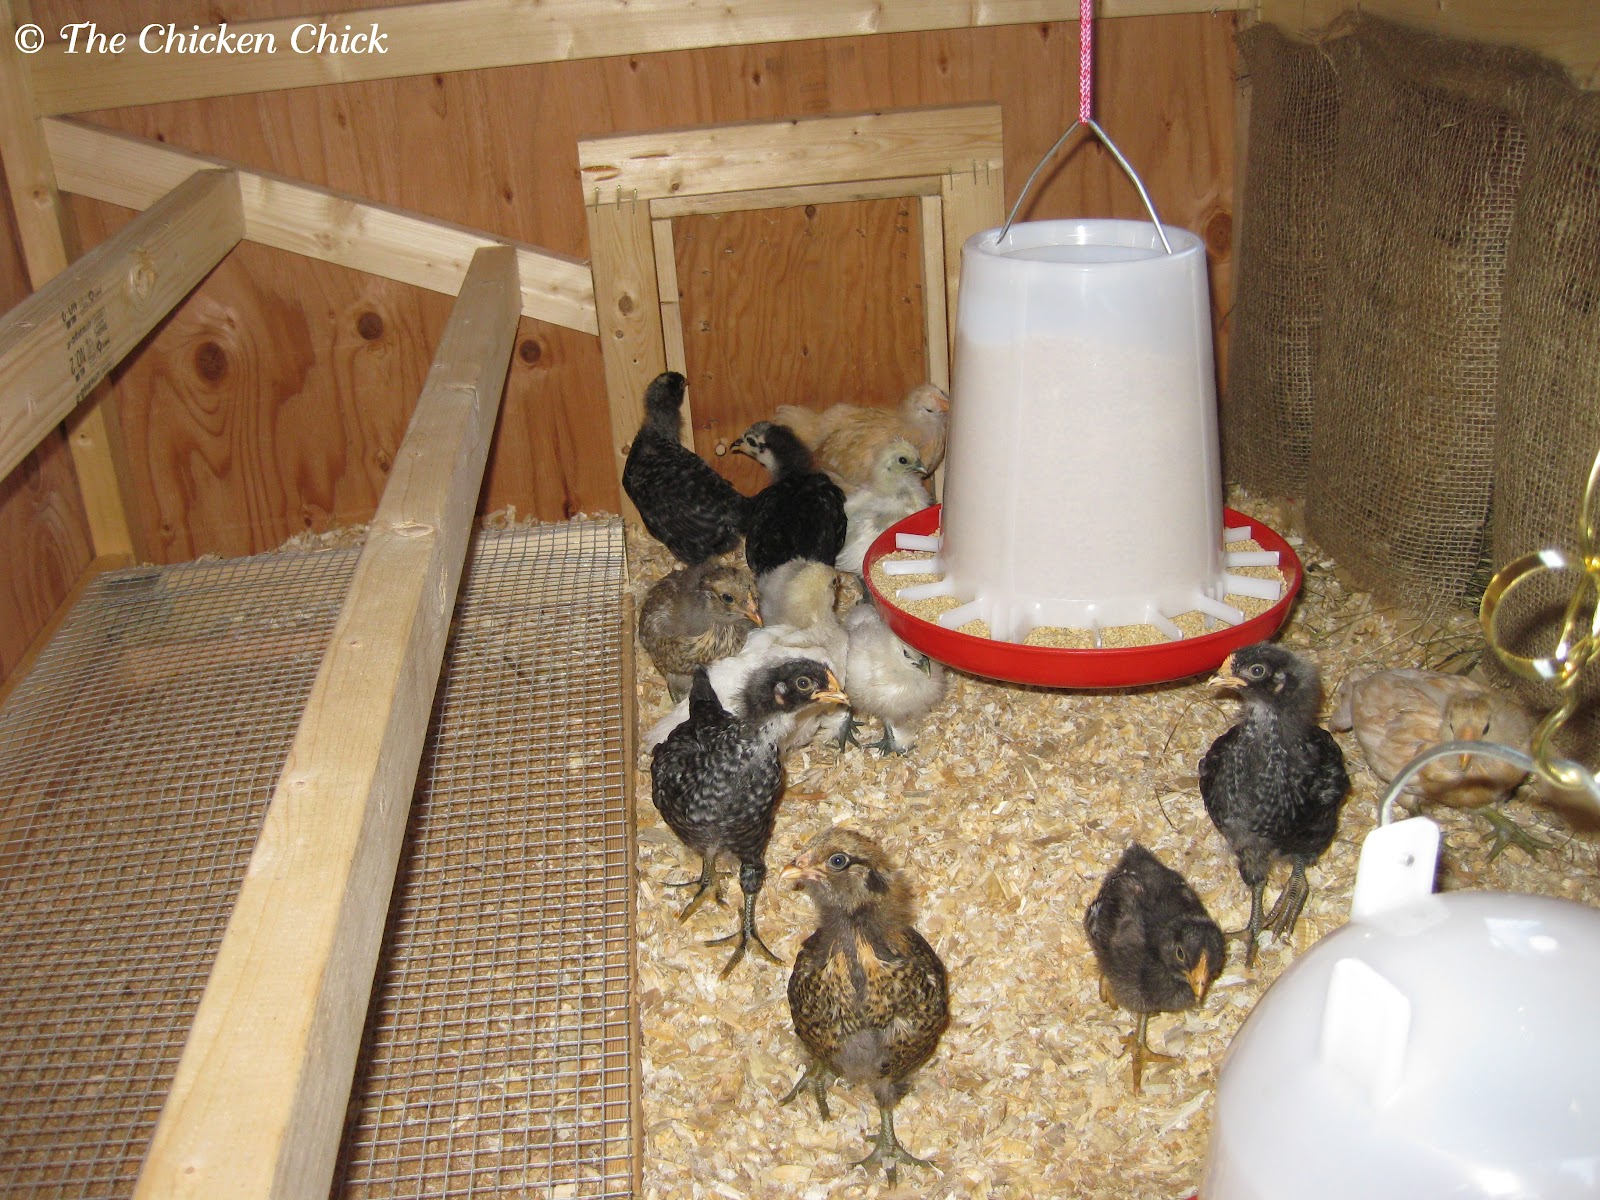 The Chicken Chick®: Coop Training Chickens to Roost &amp; Use Nest Boxes